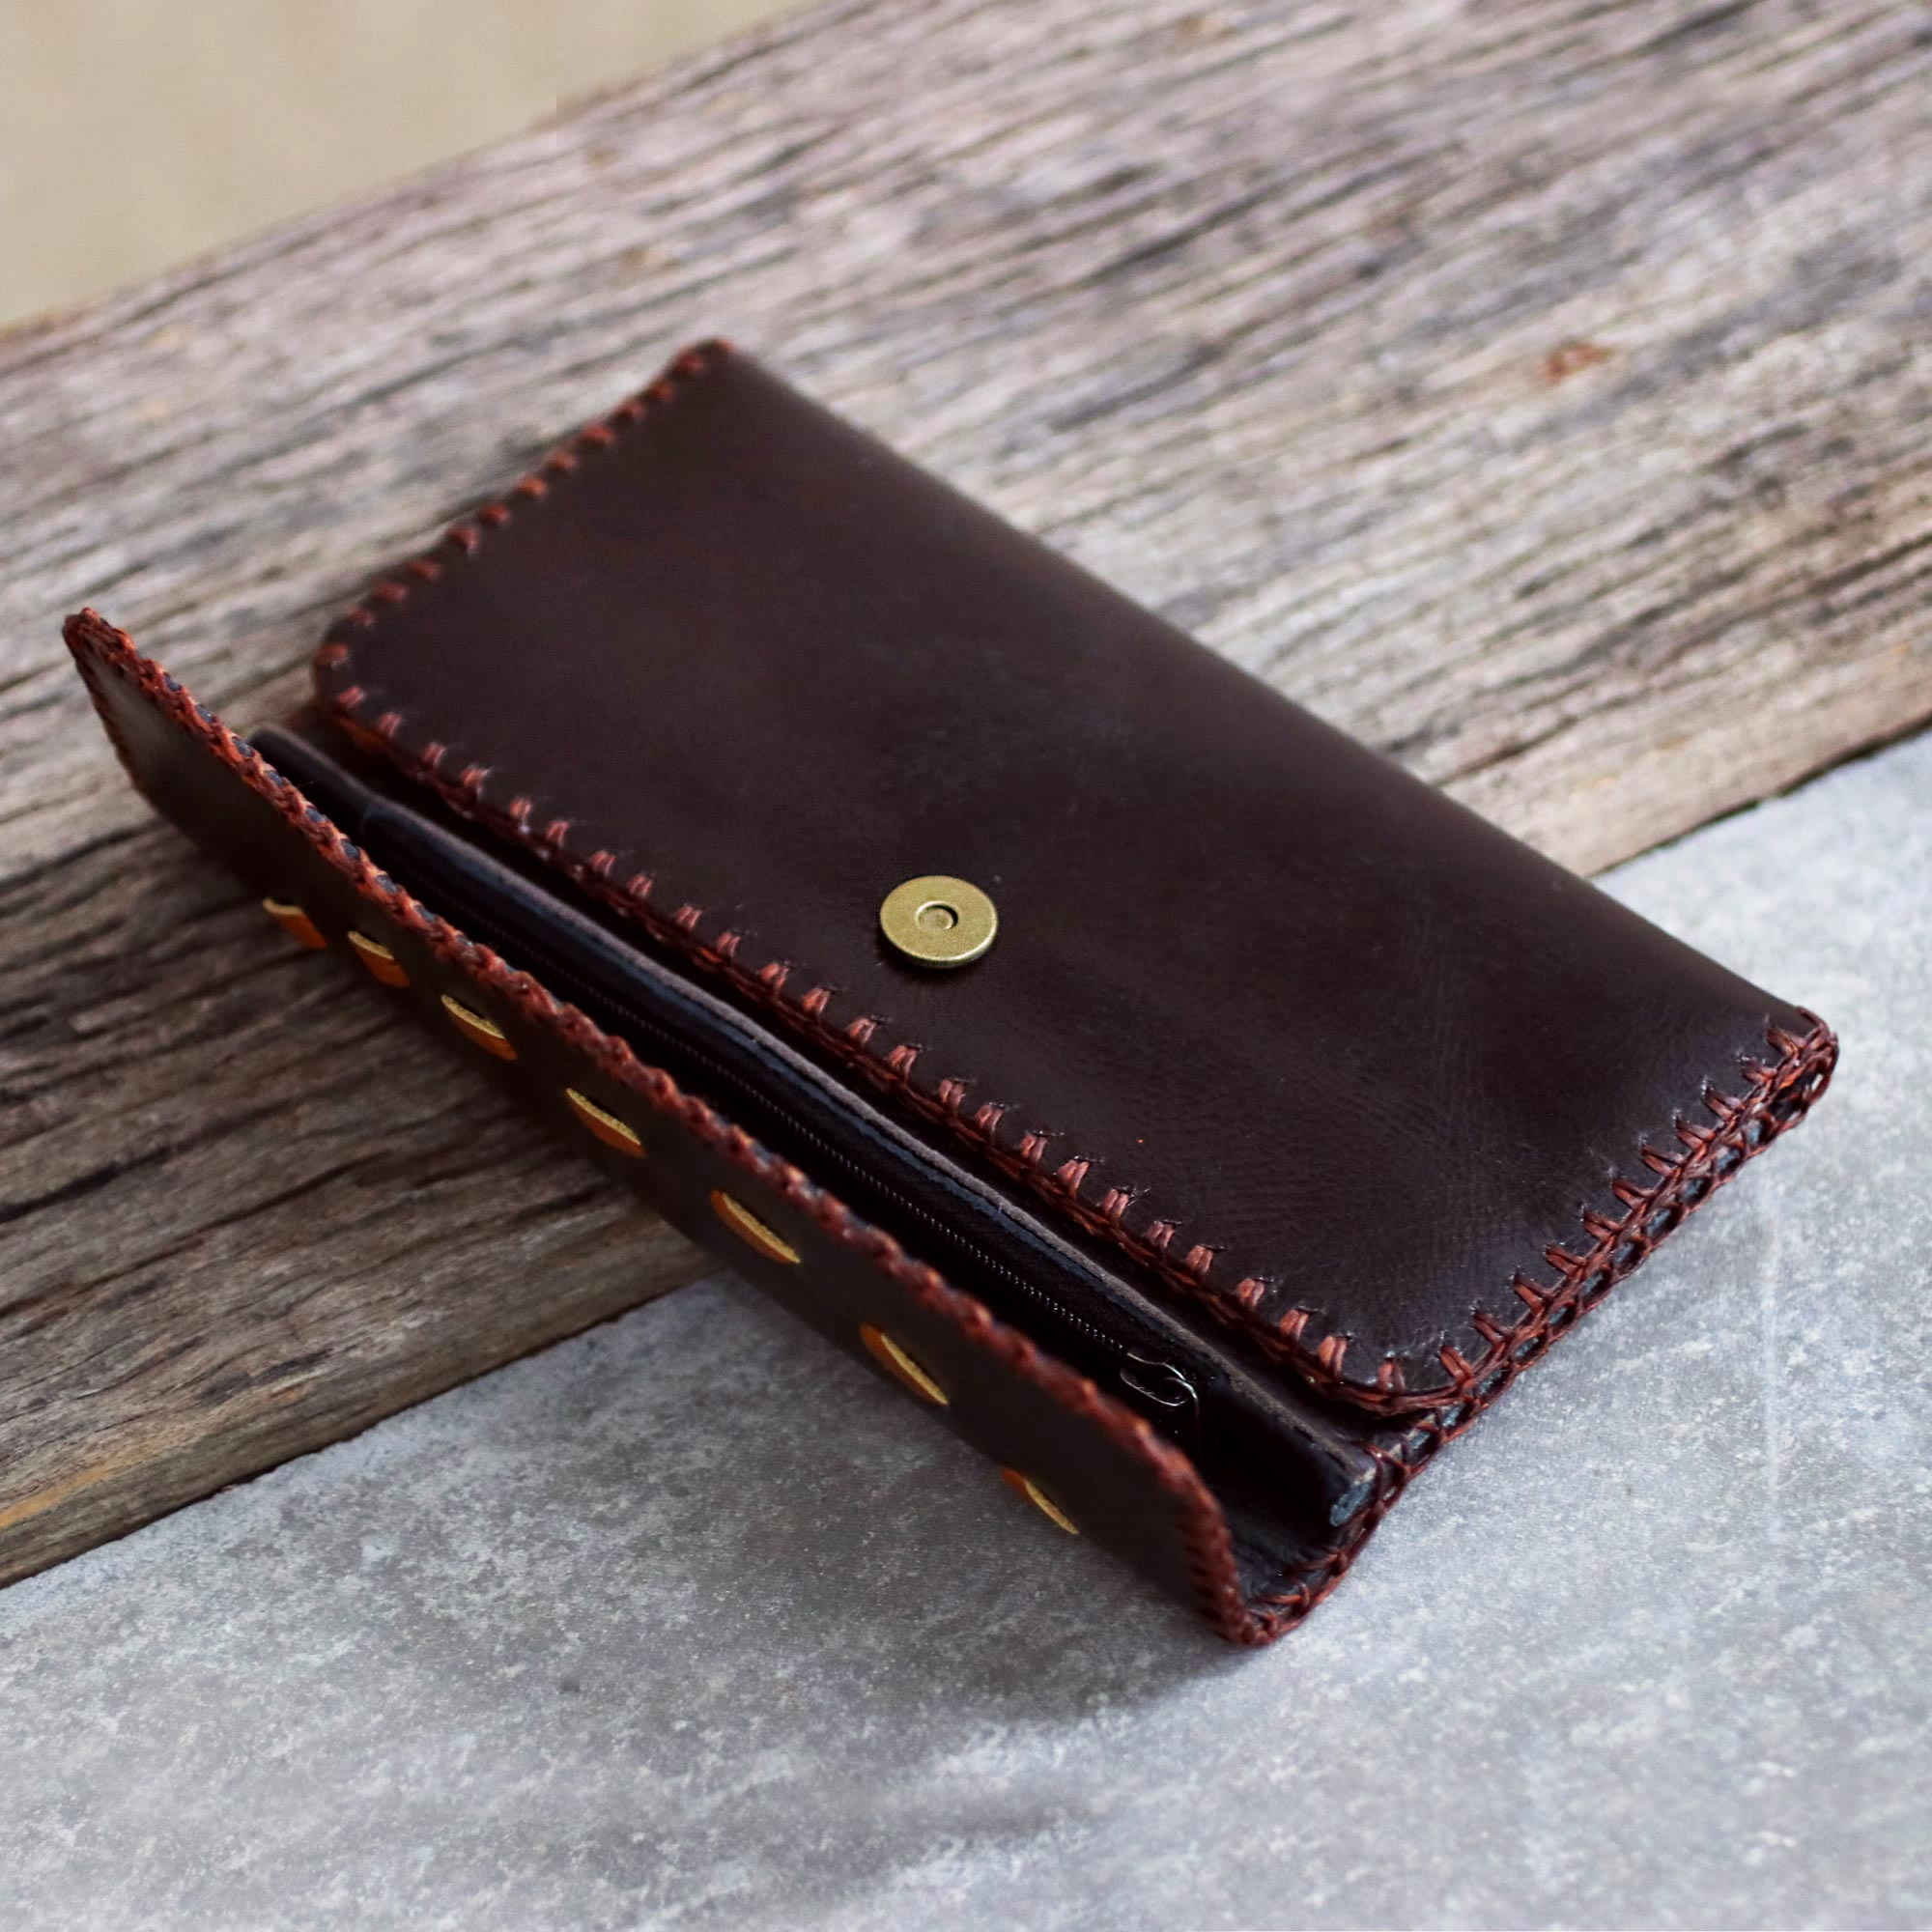 Thai Handcrafted Leather Wallet in Browns - Chic Efficiency | NOVICA